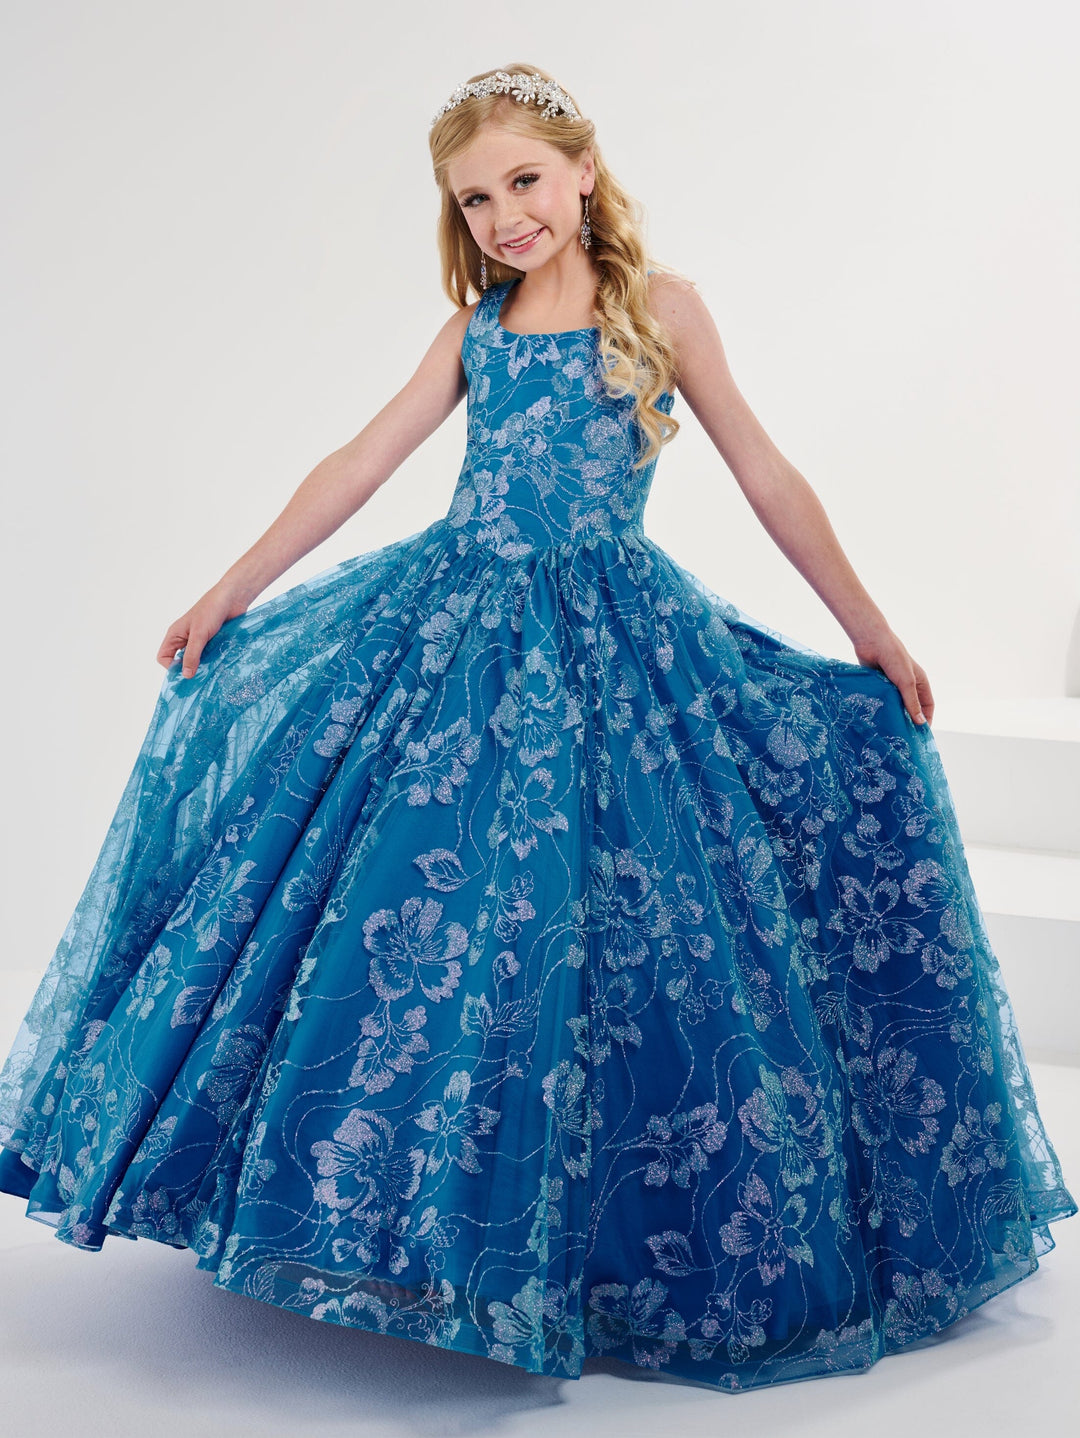 Girls Floral Glitter Print Gown by Tiffany Princess 13709